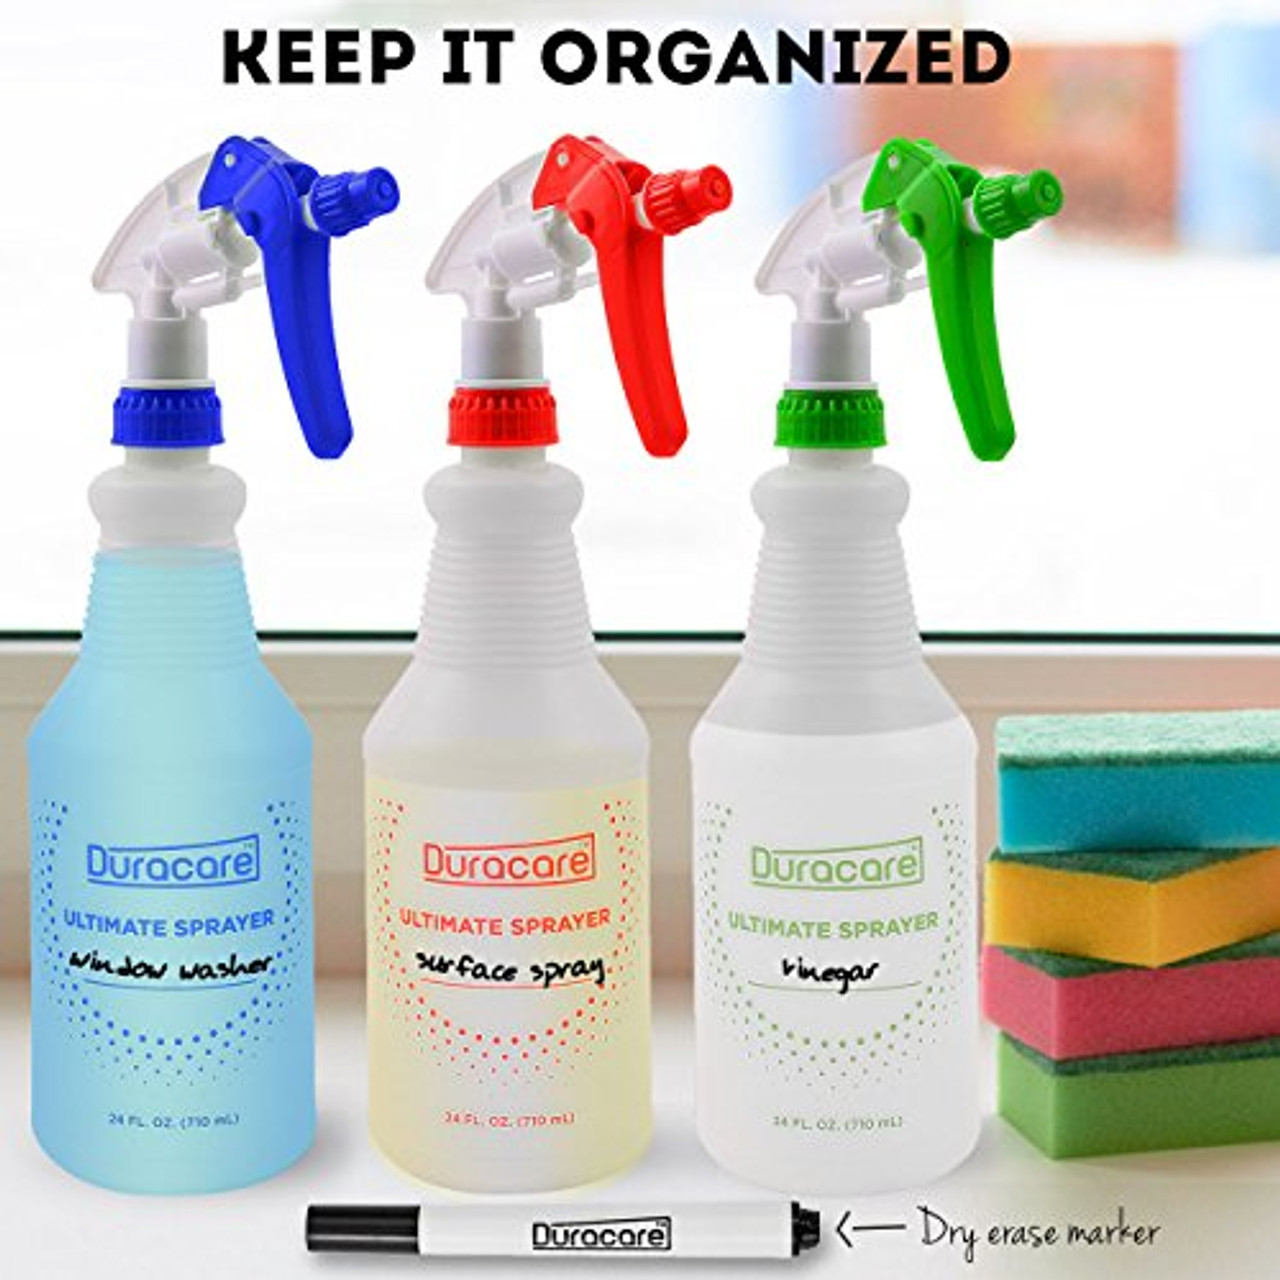 Uineko Plastic Spray Bottle (3 Pack 24 Oz 3 Colors) Heavy Duty All-Purpose  Empty Spraying Bottles Leak Proof Commercial Mist Water Bottle for Cleaning  Solutions Plants Pet with Adjustable Nozzle 24 Oz 3 Pack